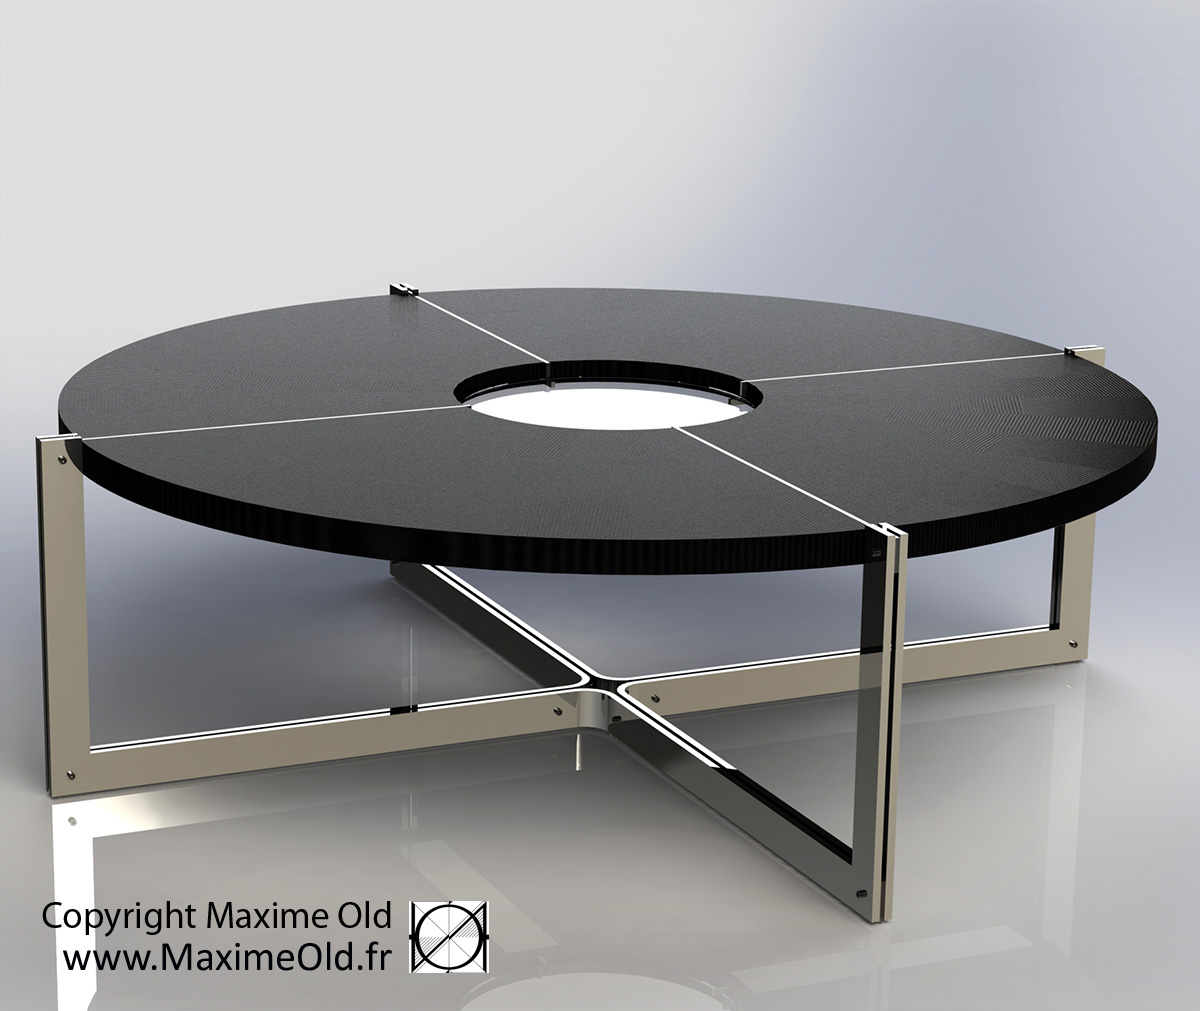 Coffee-Side Tables: Maxime Old Compass Card Table